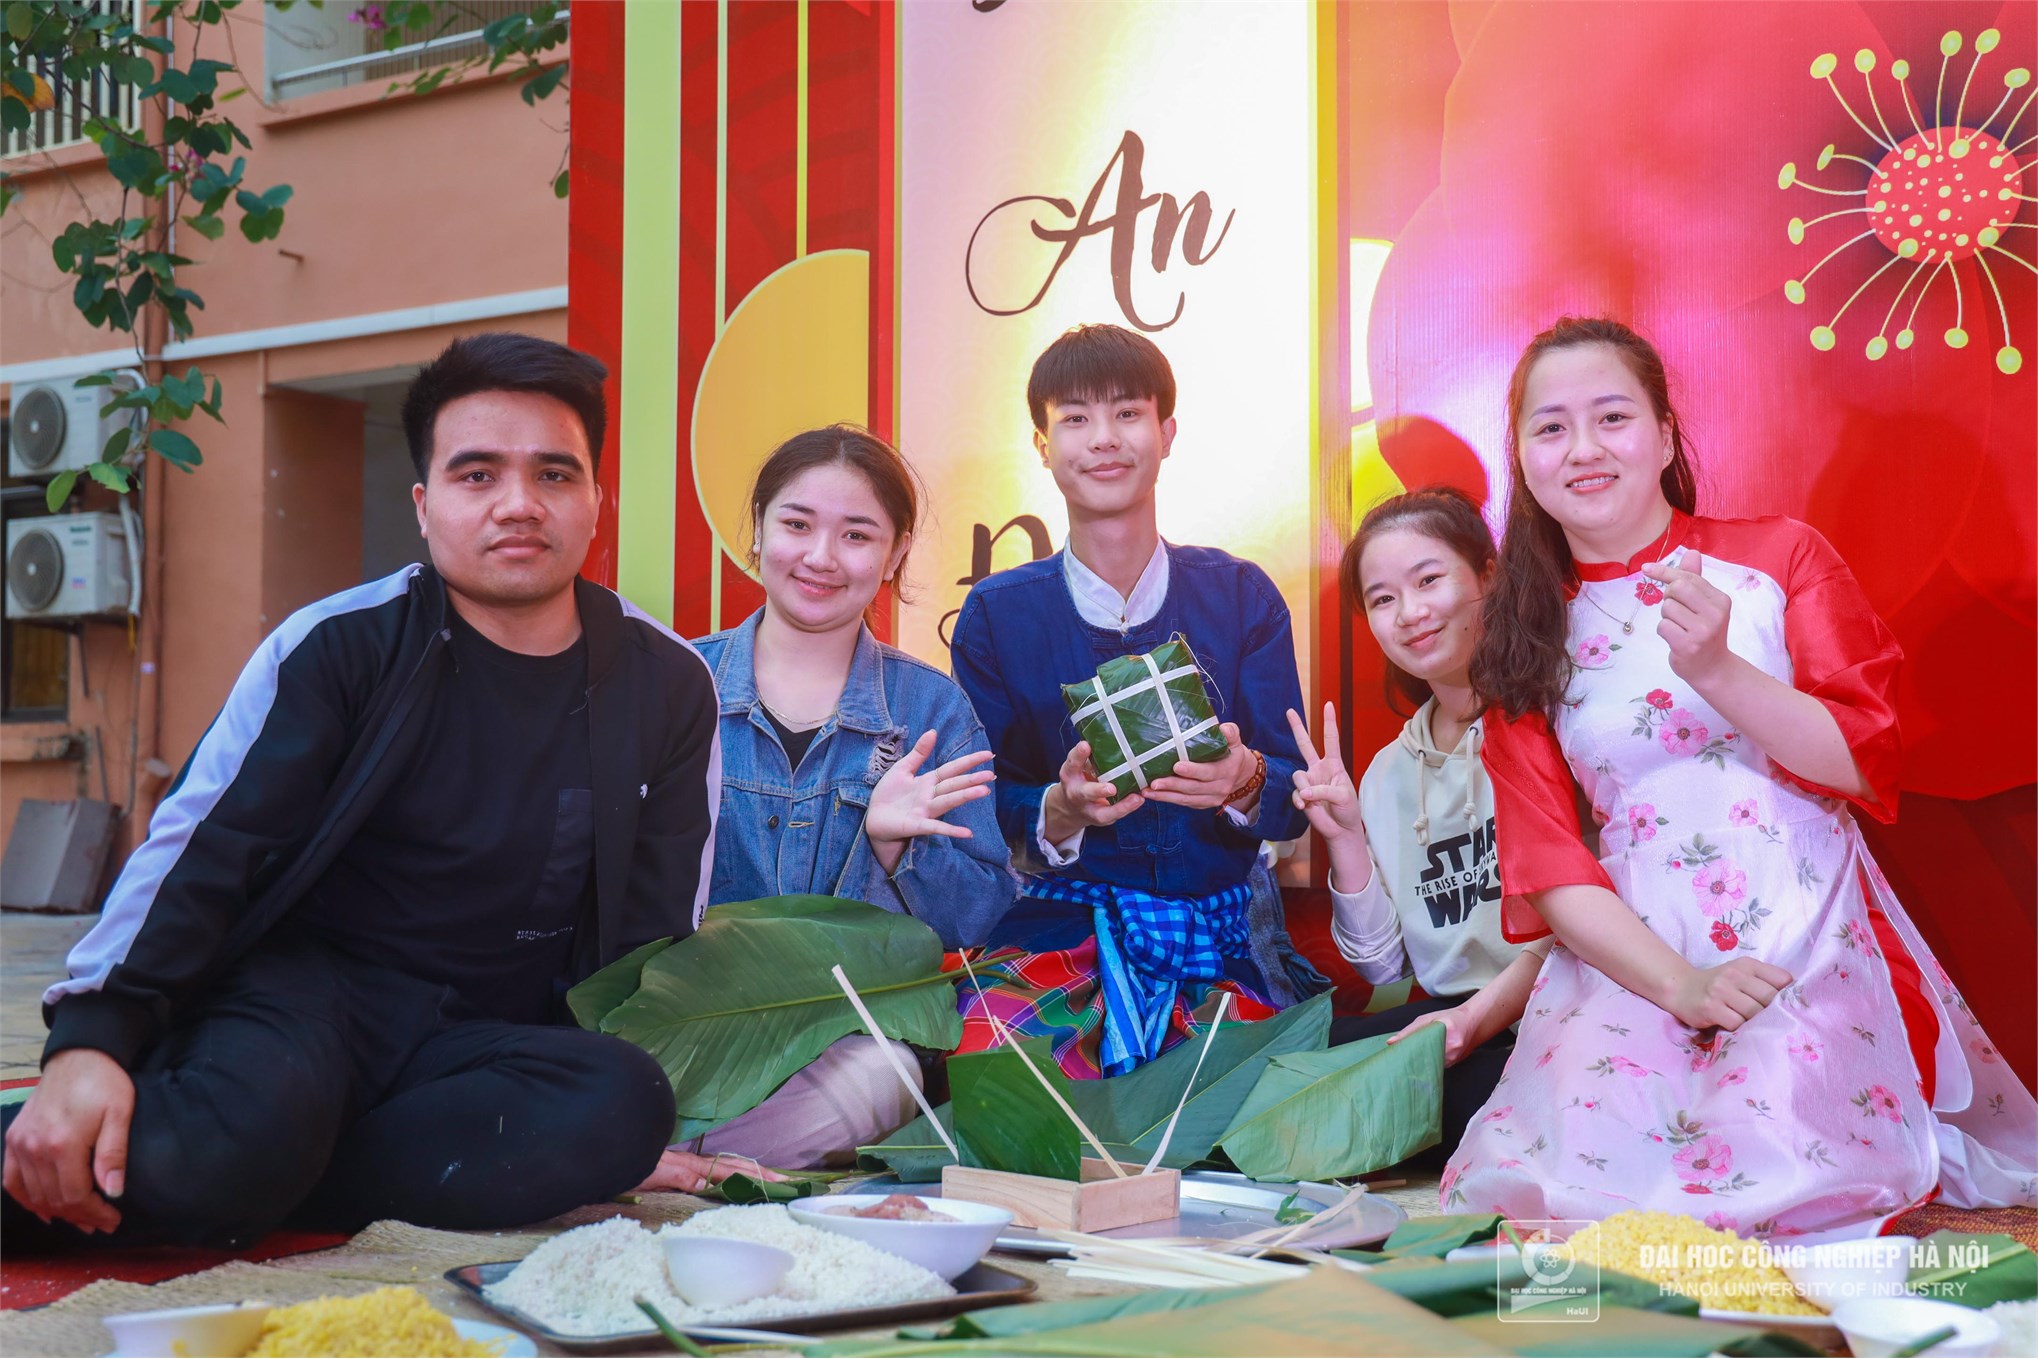 Spring reunion 2023: An opportunity for international students to experience Vietnamese Tet culture